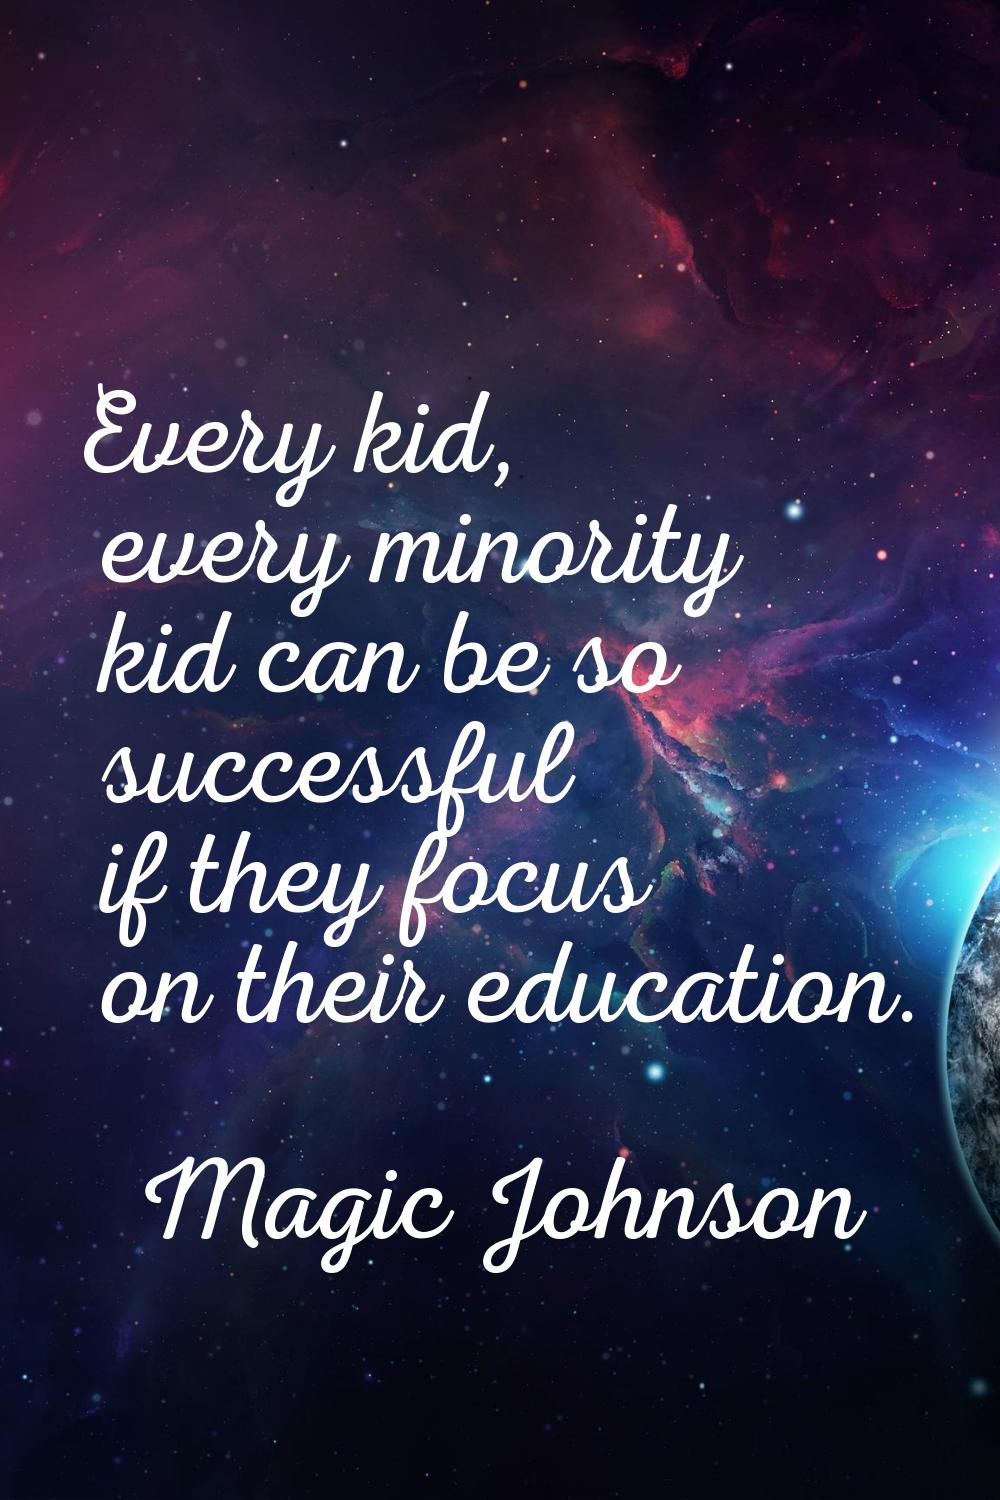 Every kid, every minority kid can be so successful if they focus on their education.